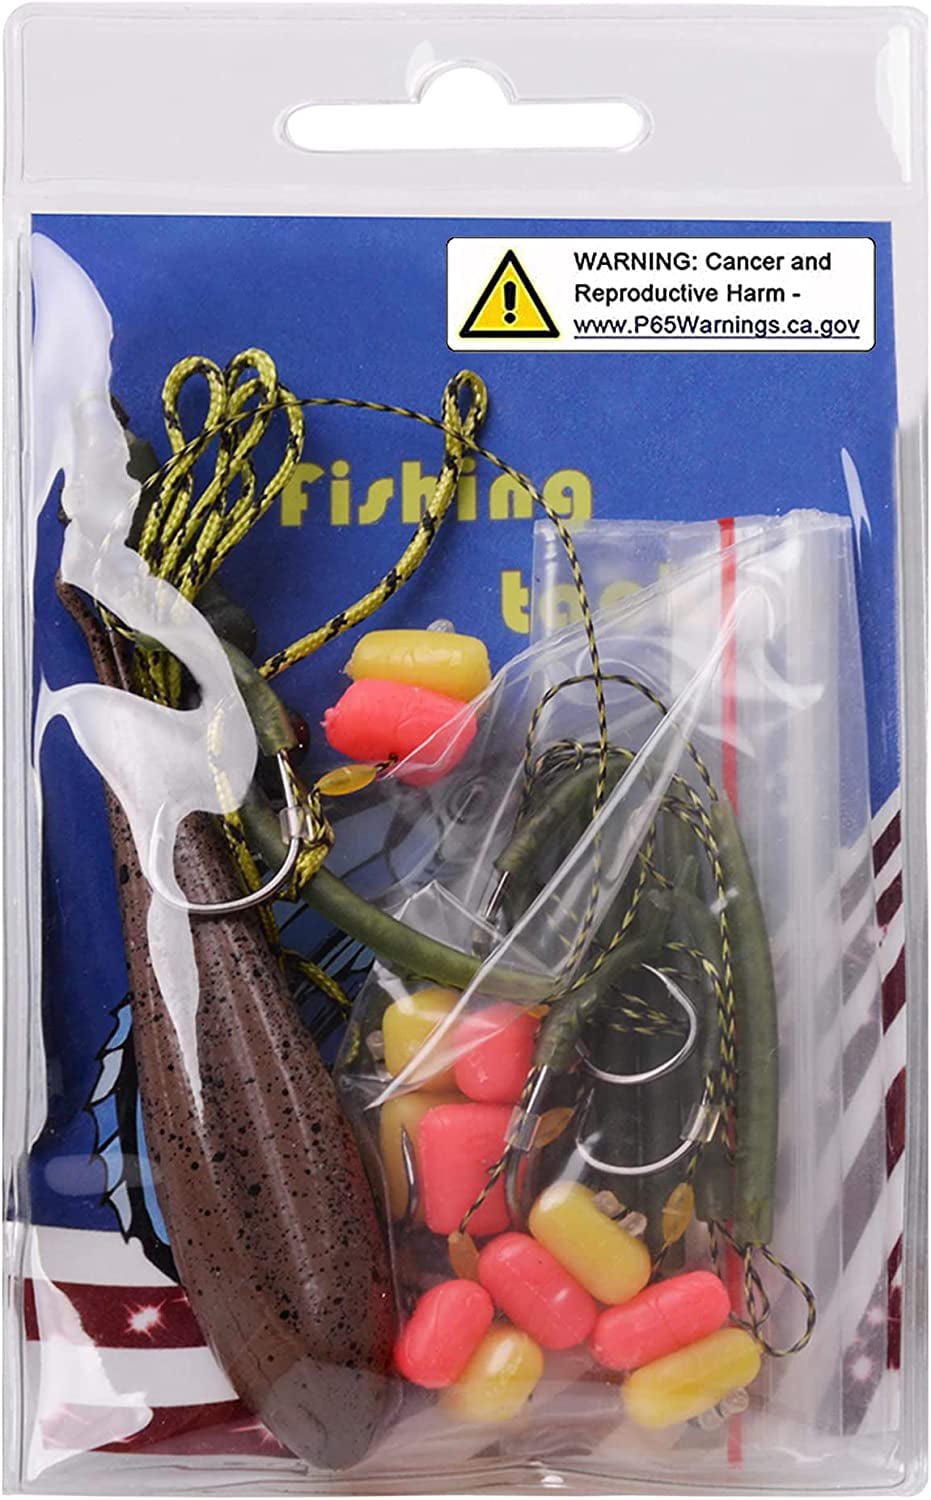 Carp Fishing Rigs Hair Carp Rigs Tackle Kit with 80G Sinker with